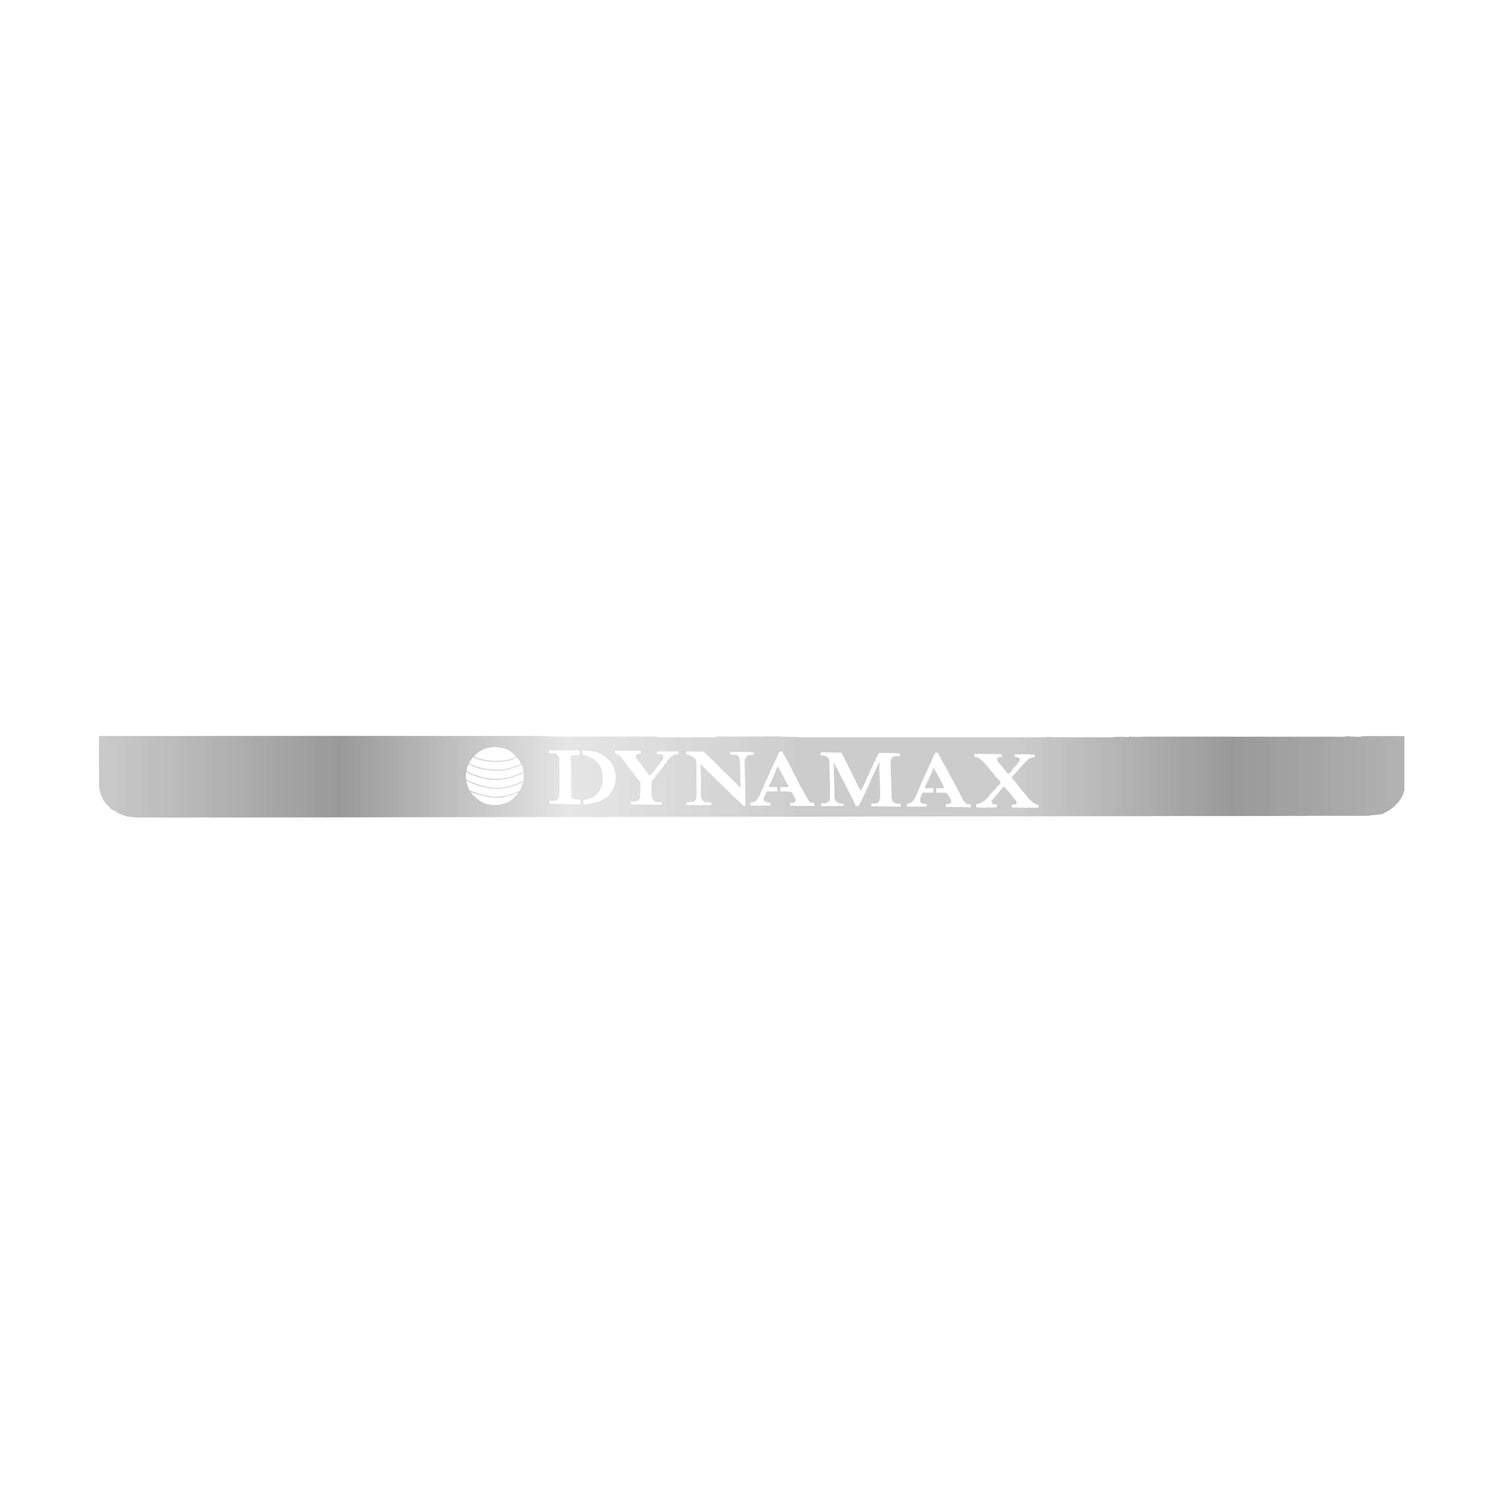 Future-Sales-Dynamax-Face-Plate-stainless-steel-mirror-finish-Height-6-Width-94-backer-plate-SSDYN-L-0589M